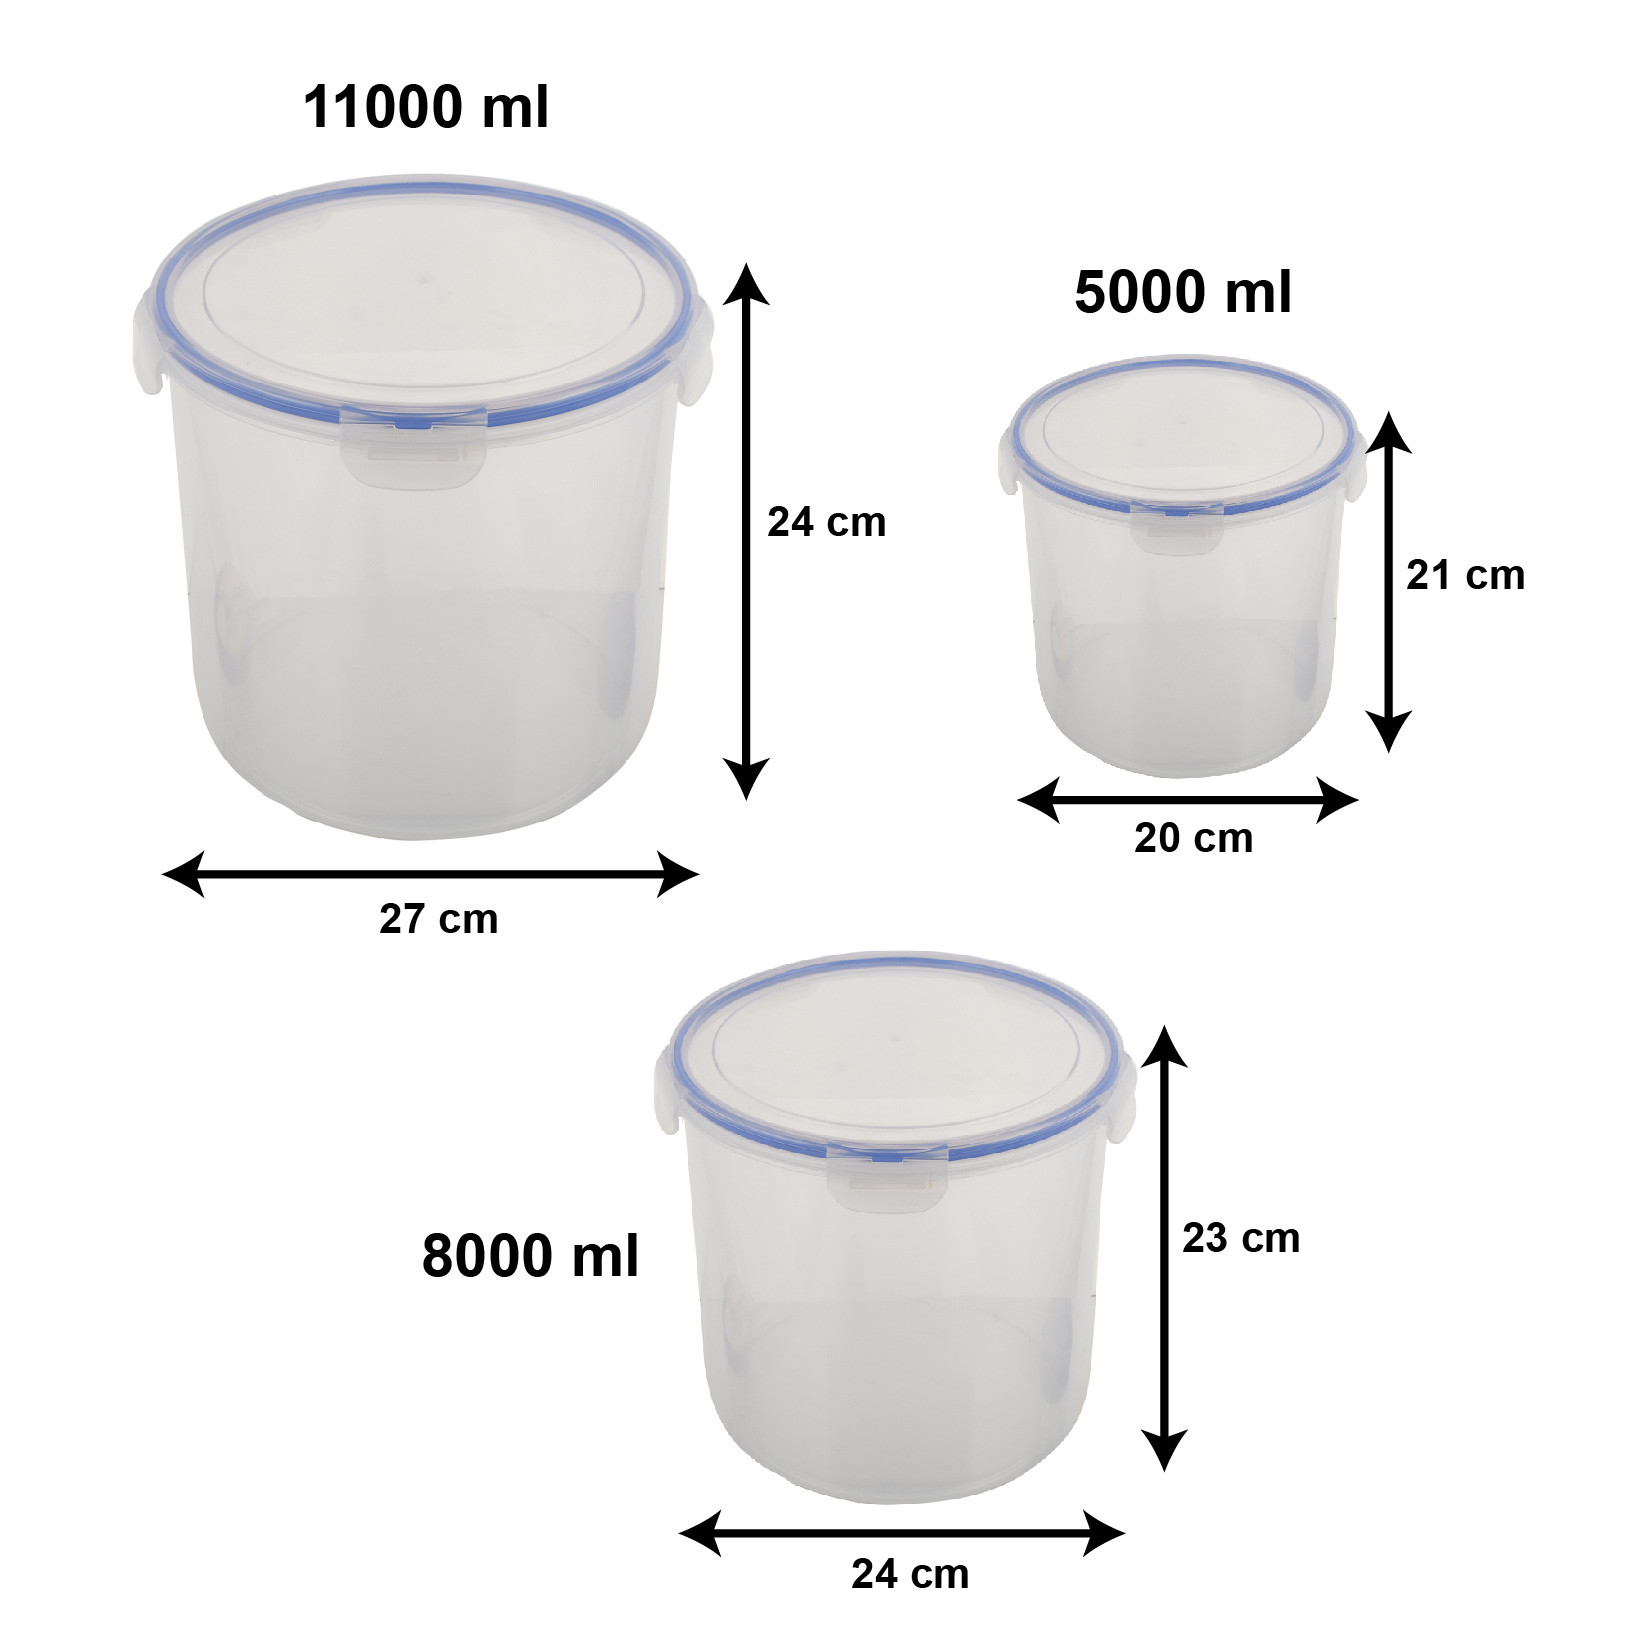 Kuber Industries Multipurpose Food Grade Transparent Plastic Food Storage Containers Kitchen Containers With Airtight Lock Lid, Set of 3 (Pink) 11000,8000 and 5000 ML-HS43KUBMART25579